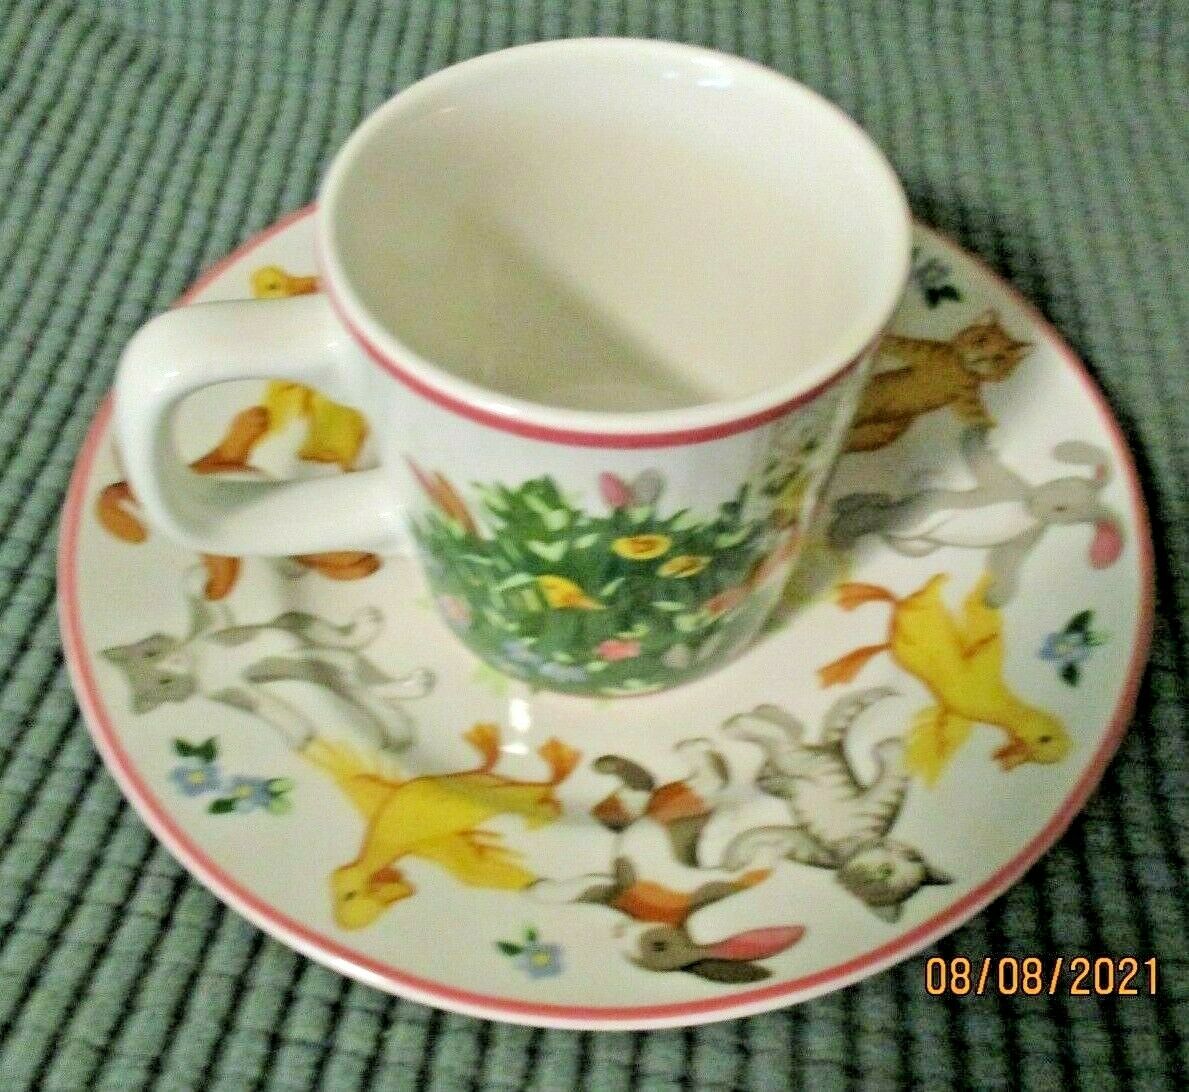 Tiffany & Co. Childs  Porcelain Plate, and Cup (1992)